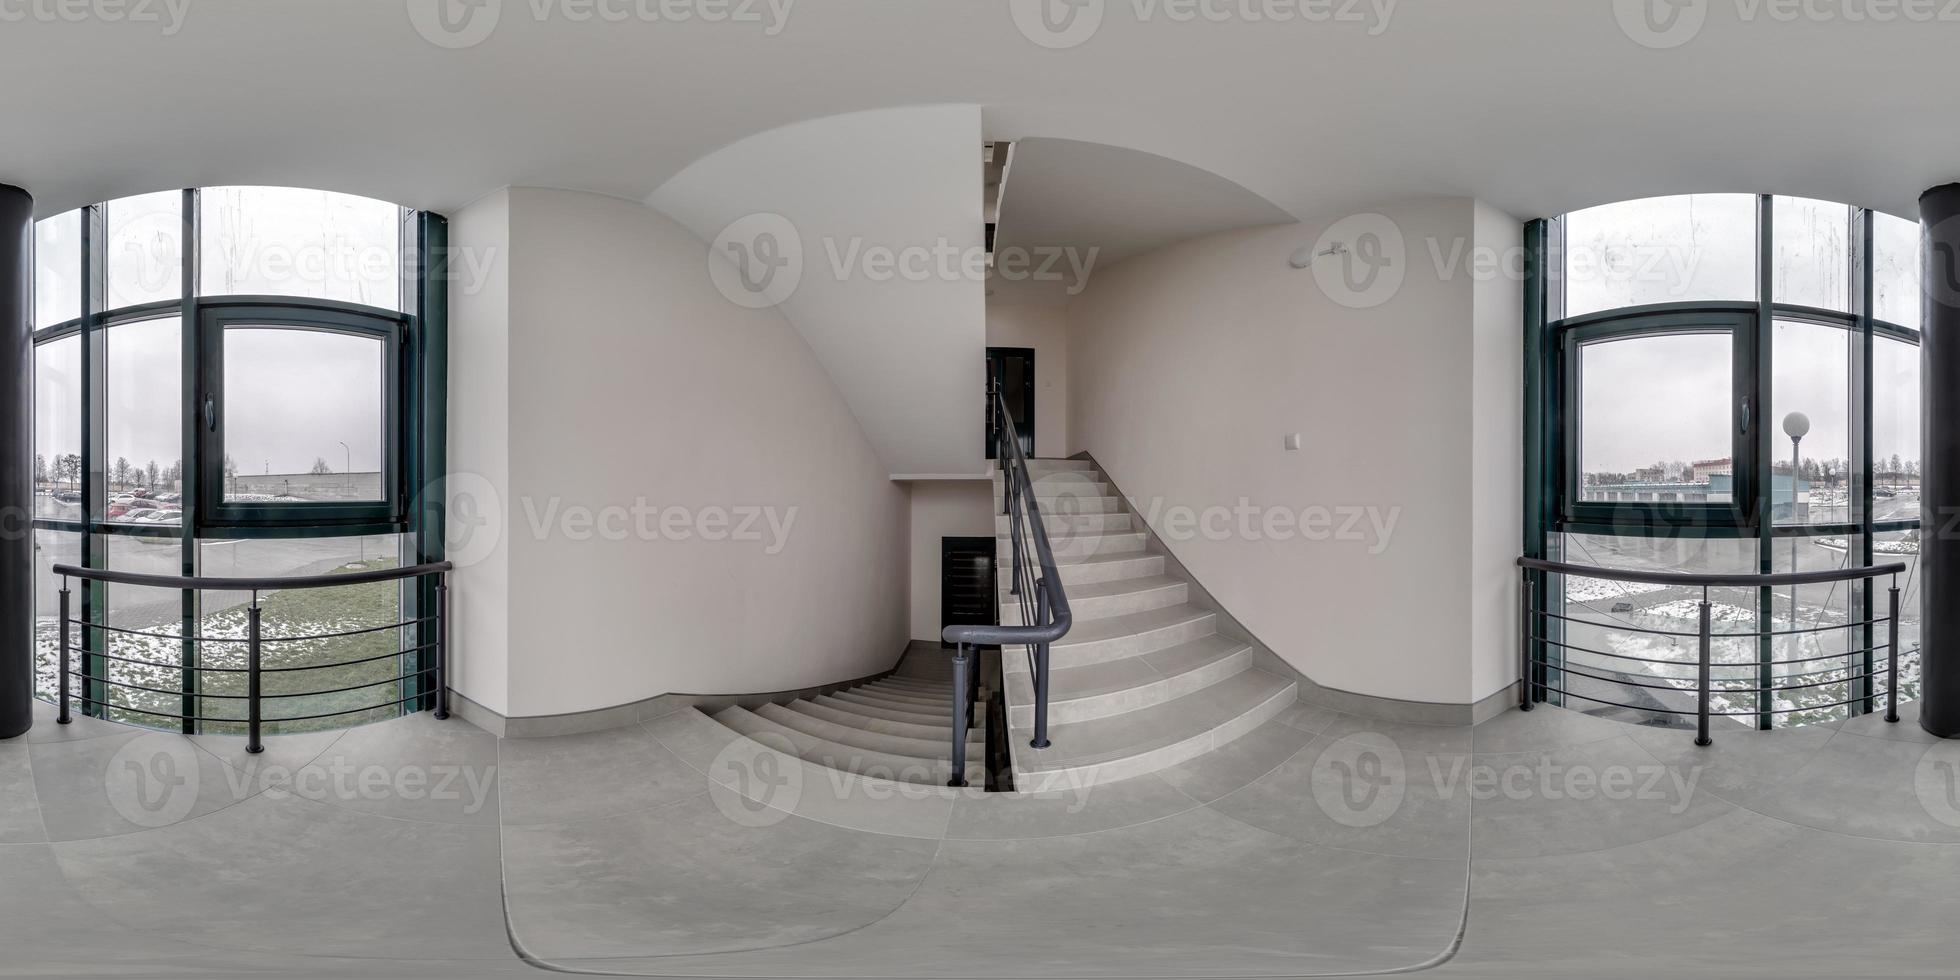 full seamless spherical hdri 360 panorama view in empty modern hall, staircase and panoramic windows in equirectangular projection, ready for AR VR content photo